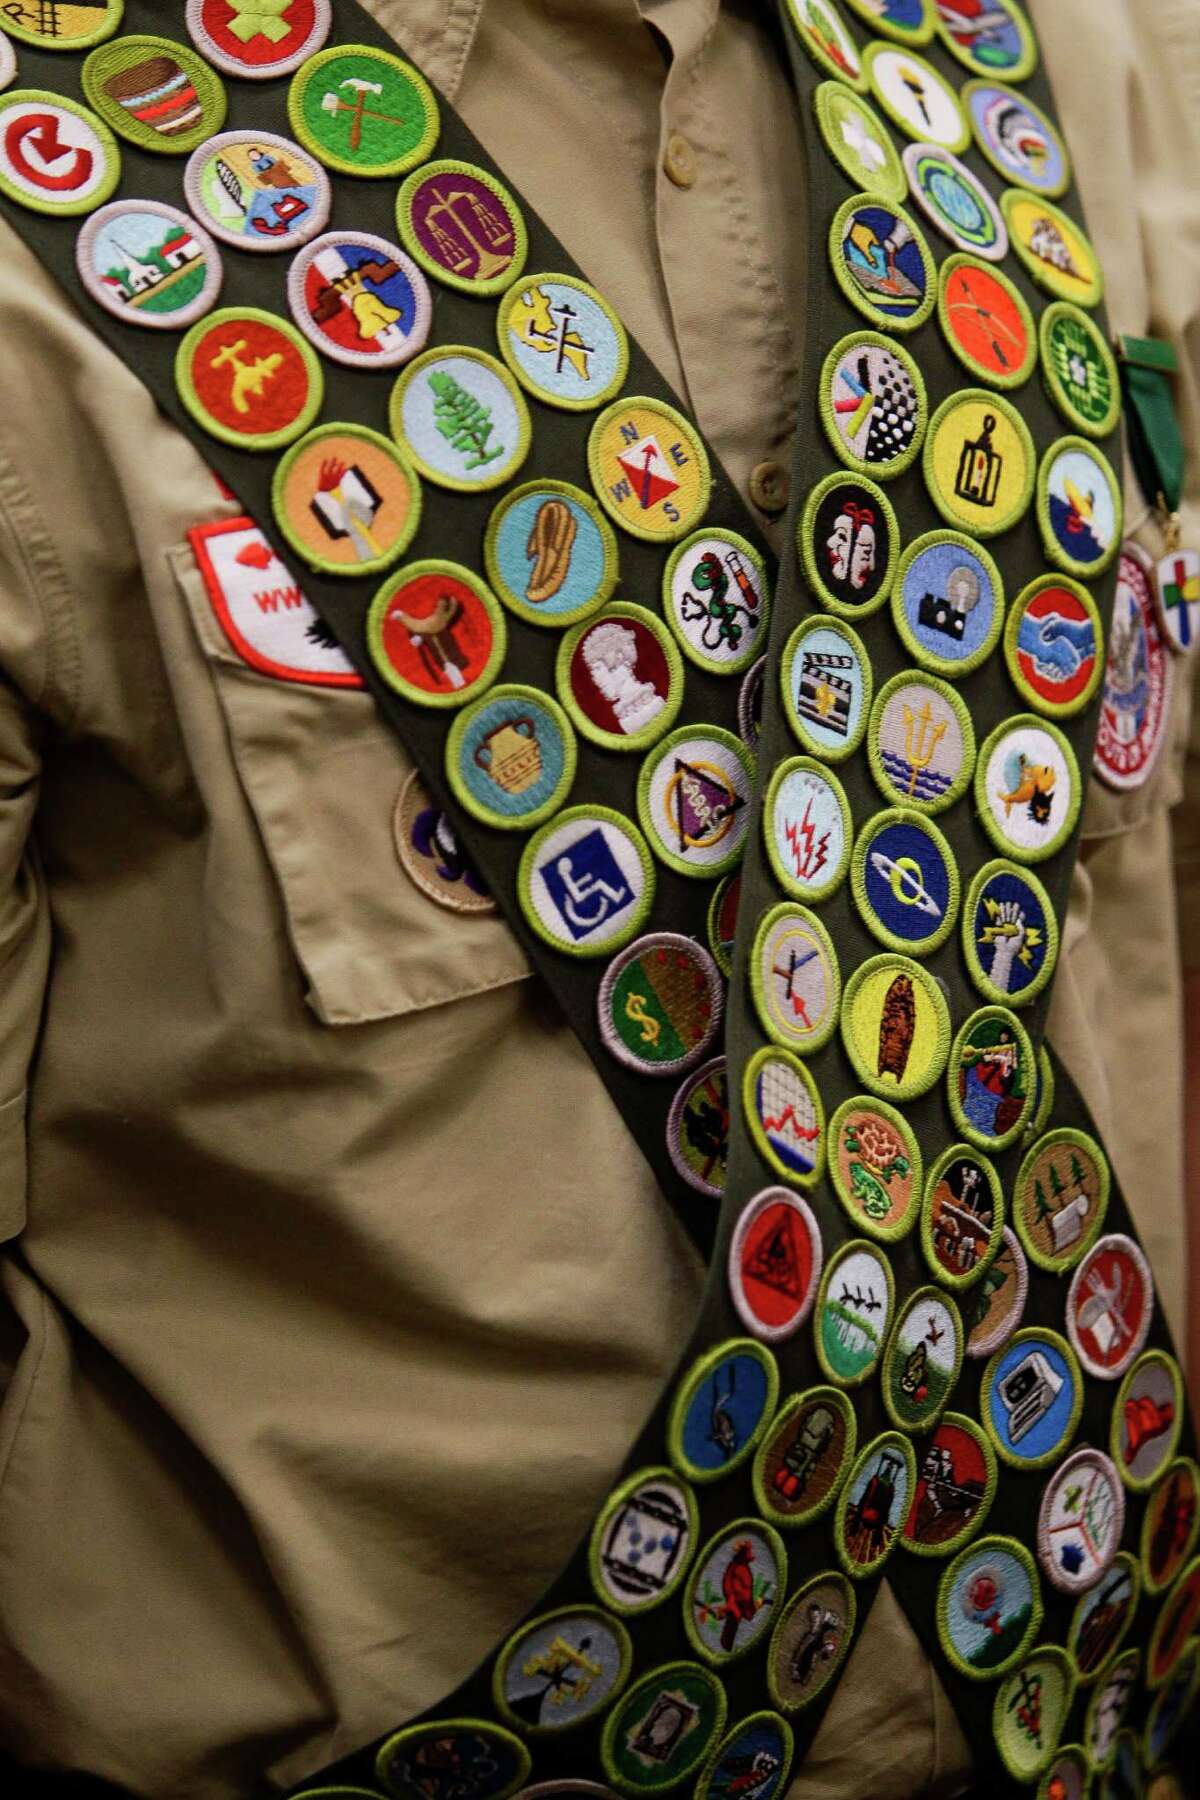 Eagle Scout John Gray, from Boy Scout Troop 599, walks back to his seat after receiving 18 merit badges and his second Gold Palm Tuesday, Jan. 26, 2016, in Houston as he earns all 138 merit badges offered by the Boy Scouts of America. By the troop's calculations, Gray is the 271st scout ever to earn all the possible badges.